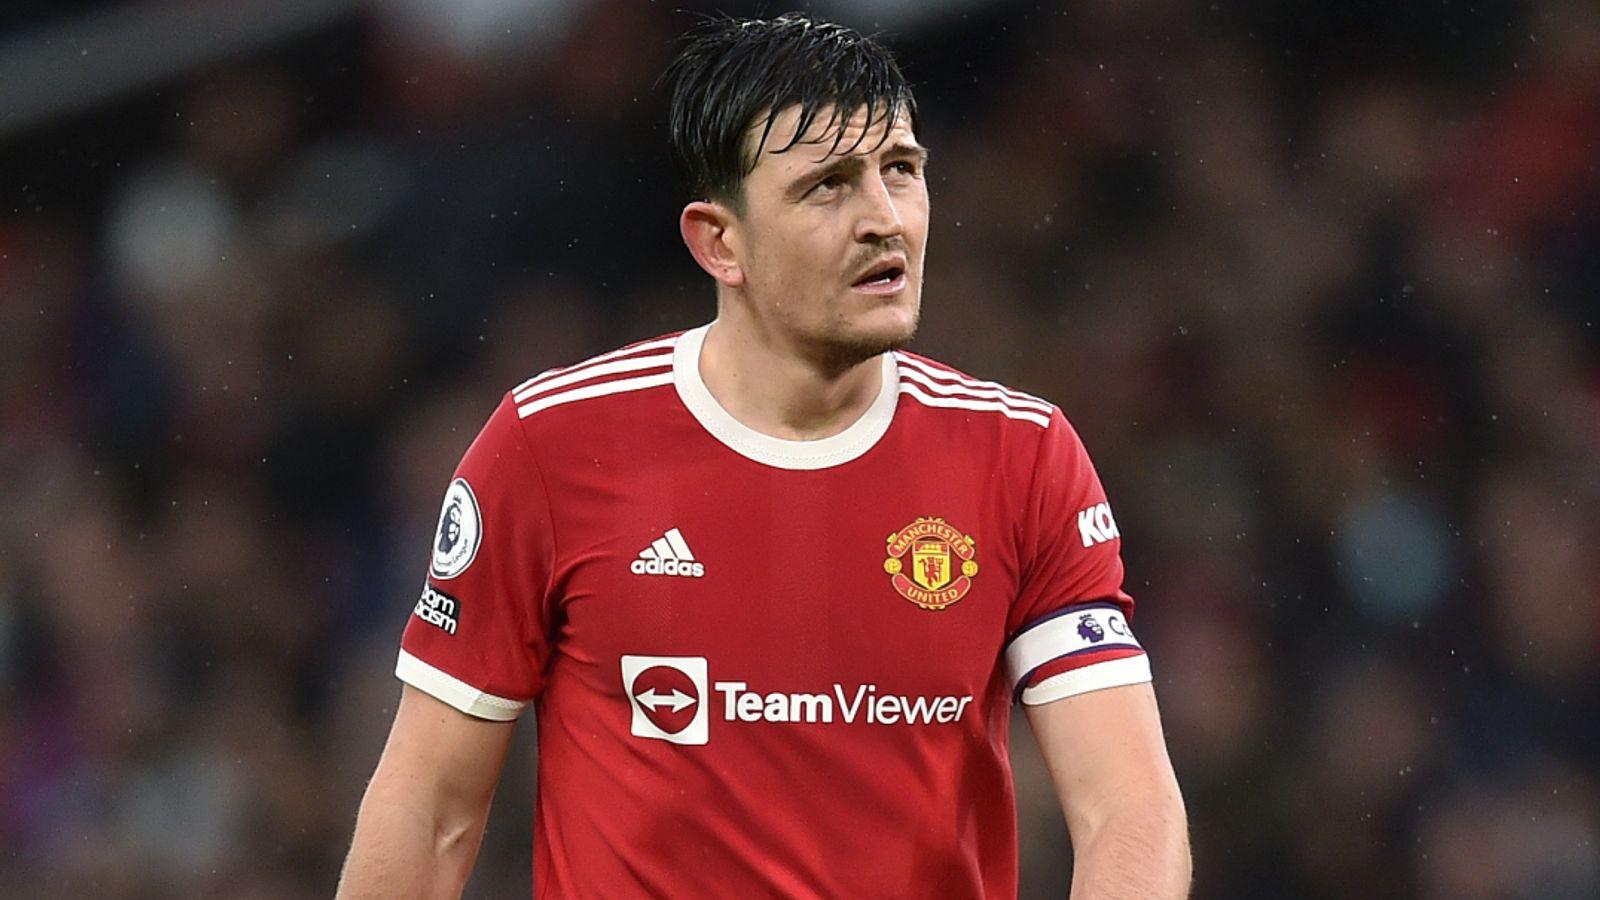 EPL transfer: Harry Maguire reluctant to leave Man United